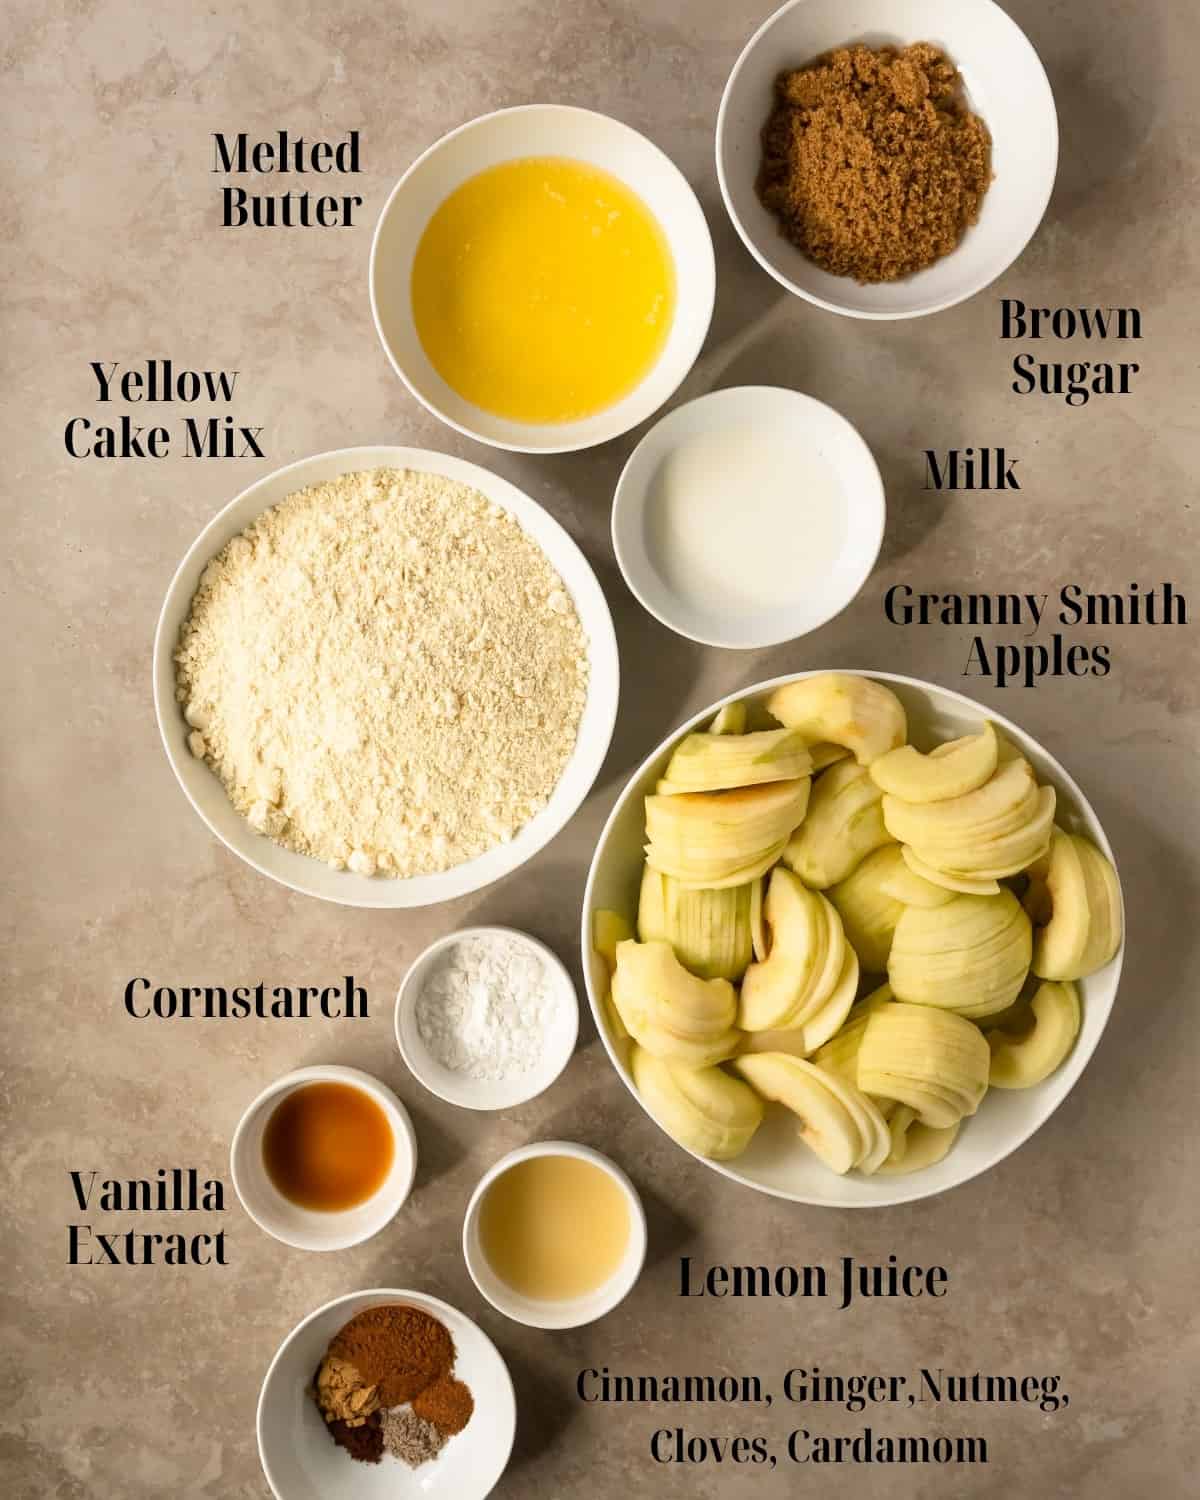 Apple Cake Mix Cobbler Ingredients in bowls. The main ingredients for this apple cobbler dump cake recipe are fresh baking apples such as granny smith, brown sugar, ground cinnamon, ginger, nutmeg, cloves and cardamom, lemon juice, cornstarch, yellow cake mix, butter and milk. 